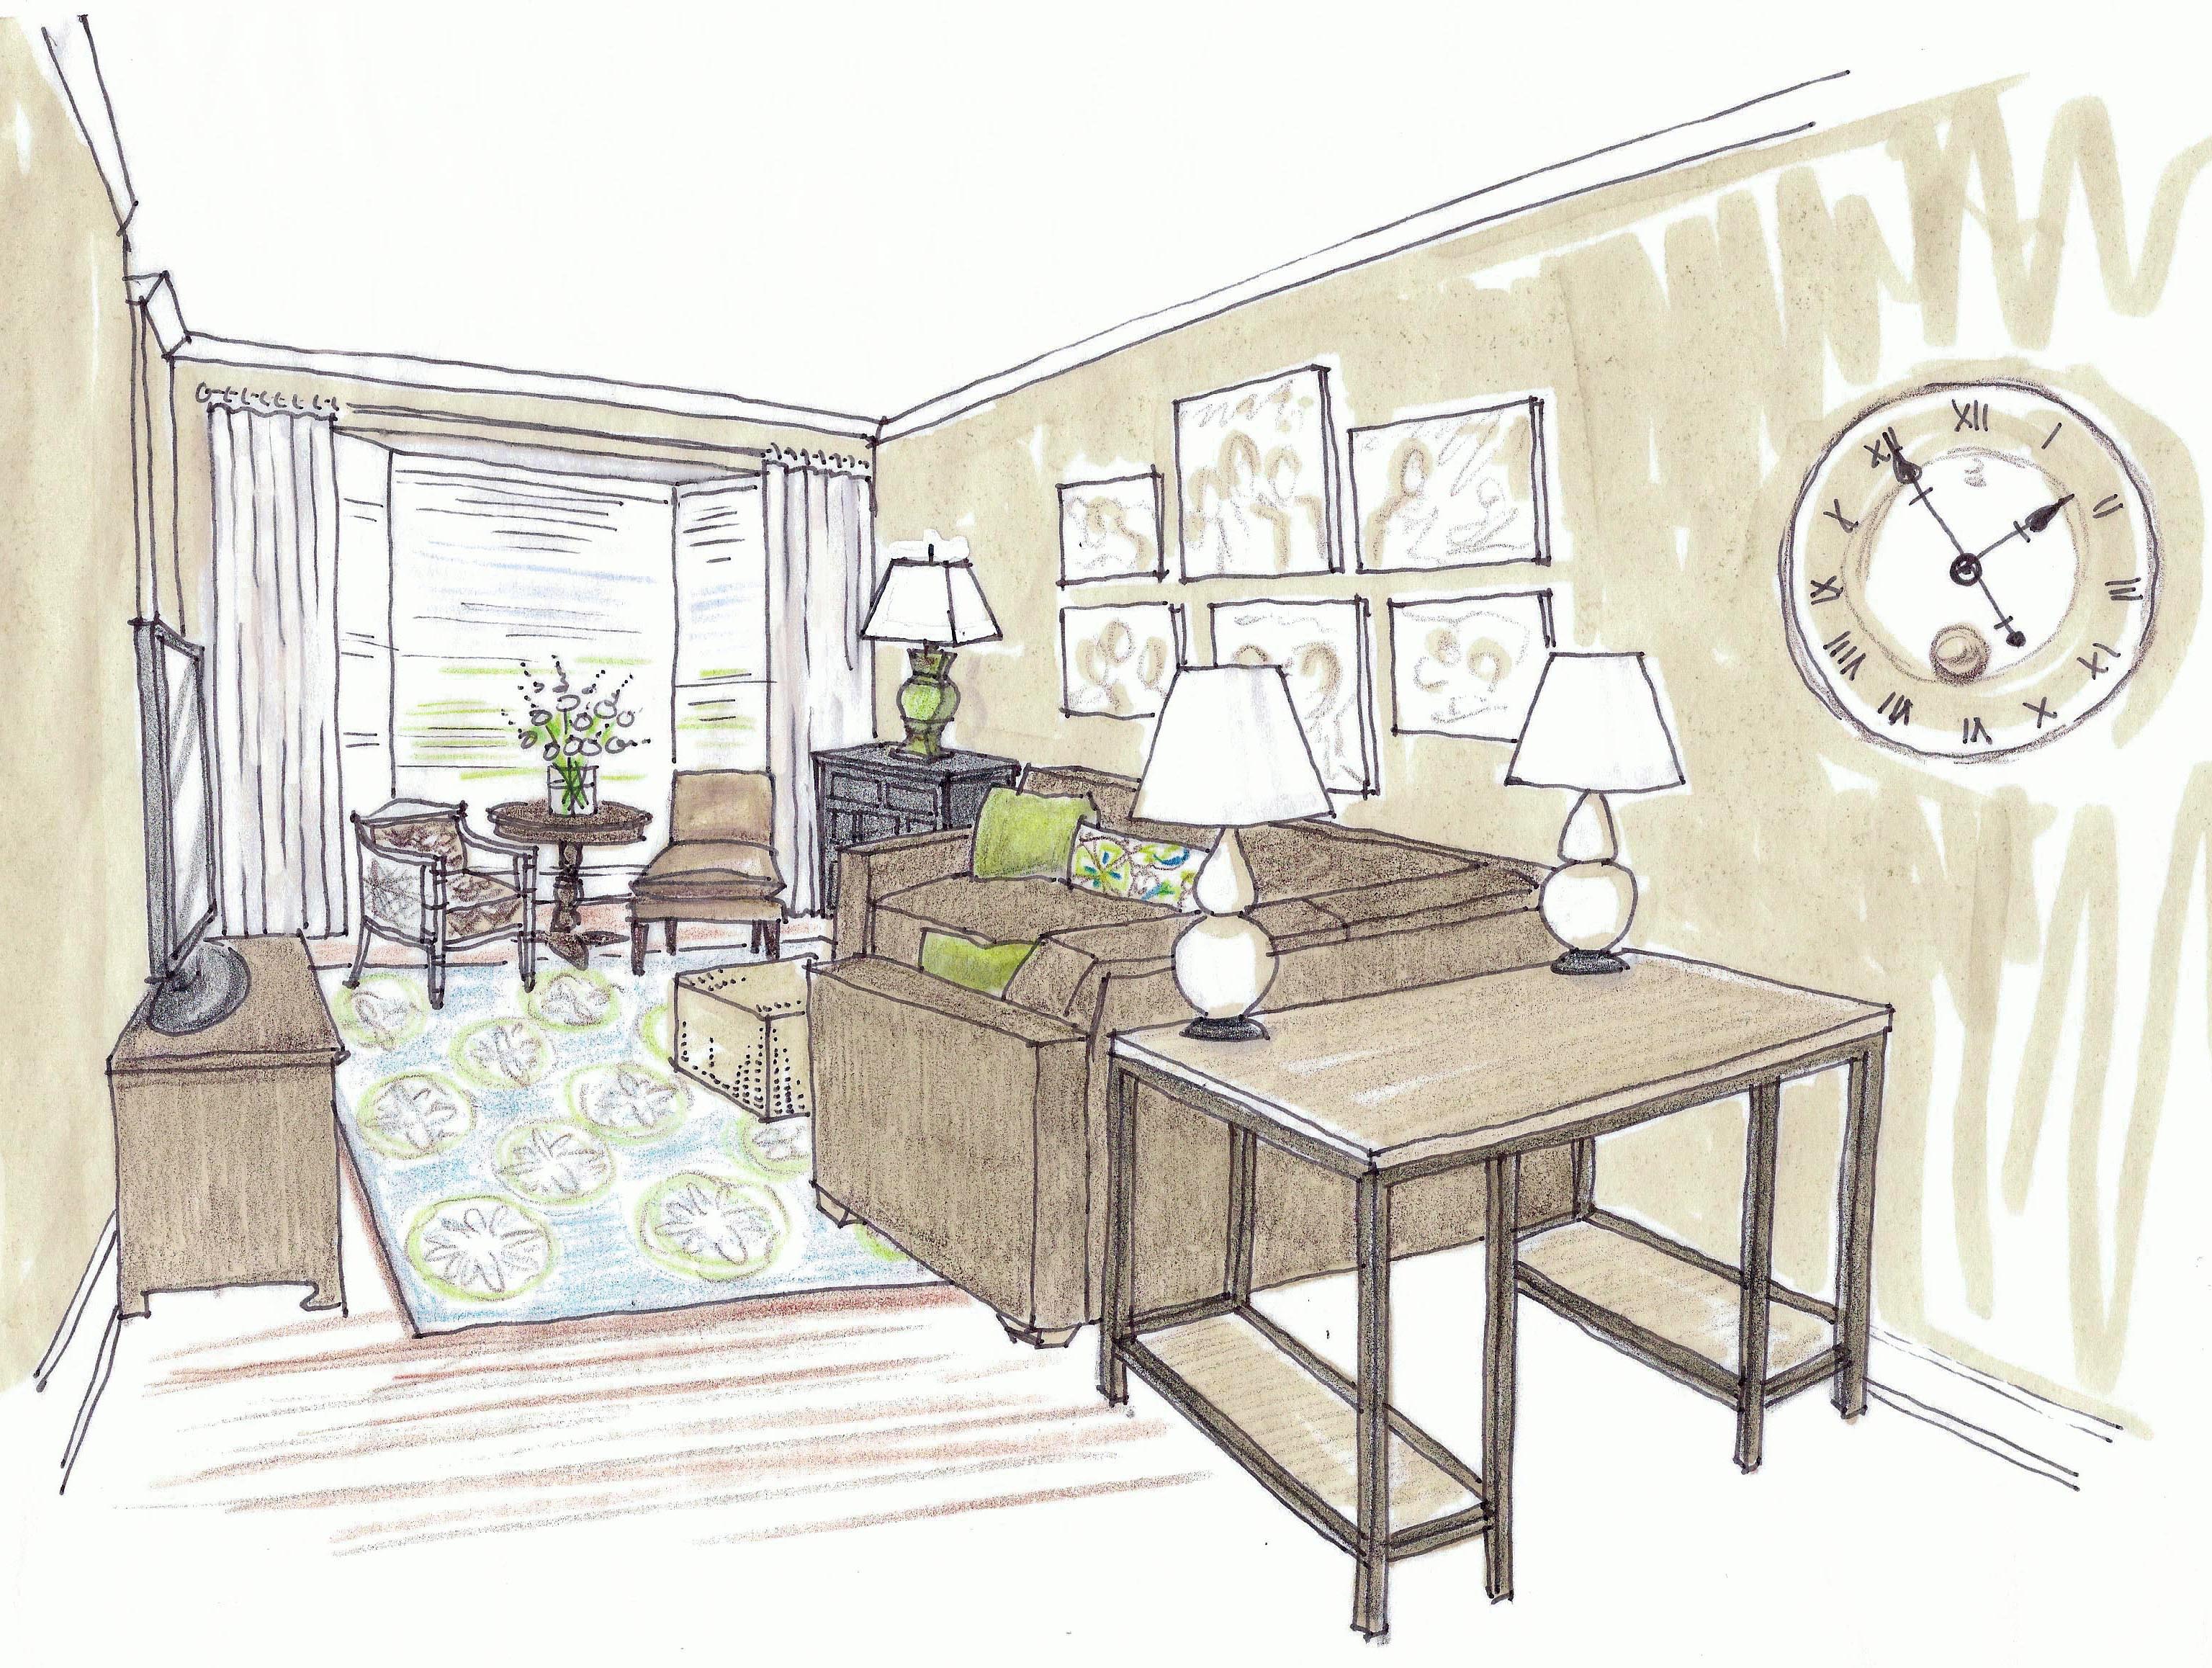 Living Room Makeover in The Post</p>
<div style='display:none;'>
<div class='vcard' id='hcard-'>
<span itemprop='description'><span itemprop='itemreviewed'>Living Room Design Sketches</span></span>
<time itemprop='dtreviewed'>2014-11-12T08:00:00-08:00</time>
Rating: <span itemprop='rating'>4.5</span>
Diposkan Oleh: <span class='fn n'>
<span class='given-name' itemprop='reviewer'>Unknown</span>
</span>
</div>
</div>
<div style='clear: both;'></div>
</div>
<div class='post-footer'>
<div class='post-footer-line post-footer-line-1'>
<div class='iklan2'>
</div>
<div id='share-button-bamzstyle'>
<p>Share ke:</p>
<a class='facebook' href='http://www.facebook.com/sharer.php?u=http://itisawomansworld-greece.blogspot.com/2014/11/living-room-design-sketches.html&title=Living Room Design Sketches' rel='nofollow' style='background:#3b5998;' target='_blank' title='Facebook'>Facebook</a>
<a class='facebook' href='https://plus.google.com/share?url=http://itisawomansworld-greece.blogspot.com/2014/11/living-room-design-sketches.html' rel='nofollow' style='background:#c0361a;' target='_blank' title='Google+'>Google+</a>
<a class='twitter' data-text='Living Room Design Sketches' data-url='http://itisawomansworld-greece.blogspot.com/2014/11/living-room-design-sketches.html' href='http://twitter.com/share' rel='nofollow' style='background:#4099ff;' target='_blank' title='Twitter'>Twitter</a>
<div class='clear'></div>
</div>
<div class='terkait'>
<h3>Related Photos of Living Room Design Sketches :</h3>
<script src='/feeds/posts/default/-/design?alt=json-in-script&callback=relpostimgcuplik&max-results=50' type='text/javascript'></script>
<script src='/feeds/posts/default/-/living?alt=json-in-script&callback=relpostimgcuplik&max-results=50' type='text/javascript'></script>
<script src='/feeds/posts/default/-/room?alt=json-in-script&callback=relpostimgcuplik&max-results=50' type='text/javascript'></script>
<script src='/feeds/posts/default/-/sketches?alt=json-in-script&callback=relpostimgcuplik&max-results=50' type='text/javascript'></script>
<ul id='relpost_img_sum'>
<script type='text/javascript'>artikelterkait();</script>
</ul>
<script type='text/javascript'>
removeRelatedDuplicates();
printRelatedLabels();
</script>
</div>
</div>
<div class='post-footer-line post-footer-line-2' style='display:none;'></div>
<div class='post-footer-line post-footer-line-3' style='display:none;'></div>
</div>
</div>
<div class='comments' id='comments'>
<a name='comments'></a>
<h4>
0
comments:
        
</h4>
<div id='Blog1_comments-block-wrapper'>
<dl class='avatar-comment-indent' id='comments-block'>
</dl>
</div>
<p class='comment-footer'>
<div class='comment-form'>
<a name='comment-form'></a>
<h4 id='comment-post-message'>Post a Comment</h4>
<p>
</p>
<a href='https://www.blogger.com/comment/frame/4540734002539007380?po=3335861611000369932&hl=en' id='comment-editor-src'></a>
<iframe allowtransparency='true' class='blogger-iframe-colorize blogger-comment-from-post' frameborder='0' height='410' id='comment-editor' name='comment-editor' src='' width='100%'></iframe>
<!--Can't find substitution for tag [post.friendConnectJs]-->
<script src='https://www.blogger.com/static/v1/jsbin/4269703388-comment_from_post_iframe.js' type='text/javascript'></script>
<script type='text/javascript'>
      BLOG_CMT_createIframe('https://www.blogger.com/rpc_relay.html', '0');
    </script>
</div>
</p>
<div id='backlinks-container'>
<div id='Blog1_backlinks-container'>
</div>
</div>
</div>
</div>

        </div></div>
      
<!--Can't find substitution for tag [adEnd]-->
</div>
<div class='blog-pager' id='blog-pager'>
<span id='blog-pager-newer-link'>
<a class='blog-pager-newer-link' href='http://itisawomansworld-greece.blogspot.com/2014/11/living-room-interior-design-sketch.html' id='Blog1_blog-pager-newer-link' title='Newer Post'>Newer Post</a>
</span>
<span id='blog-pager-older-link'>
<a class='blog-pager-older-link' href='http://itisawomansworld-greece.blogspot.com/2014/11/living-room-modern-side-tables.html' id='Blog1_blog-pager-older-link' title='Older Post'>Older Post</a>
</span>
<a class='home-link' href='http://itisawomansworld-greece.blogspot.com/'>Home</a>
</div>
<div class='clear'></div>
<div class='post-feeds'>
<div class='feed-links'>
Subscribe to:
<a class='feed-link' href='http://itisawomansworld-greece.blogspot.com/feeds/3335861611000369932/comments/default' target='_blank' type='application/atom+xml'>Post Comments (Atom)</a>
</div>
</div>
</div></div>
</div>
<div id='sidebar-wrapper'>
<div id='search-box'>
<form action='/search' id='search-form' method='get' target='_top'>
<input id='search-text' name='q' onblur='if (this.value == 